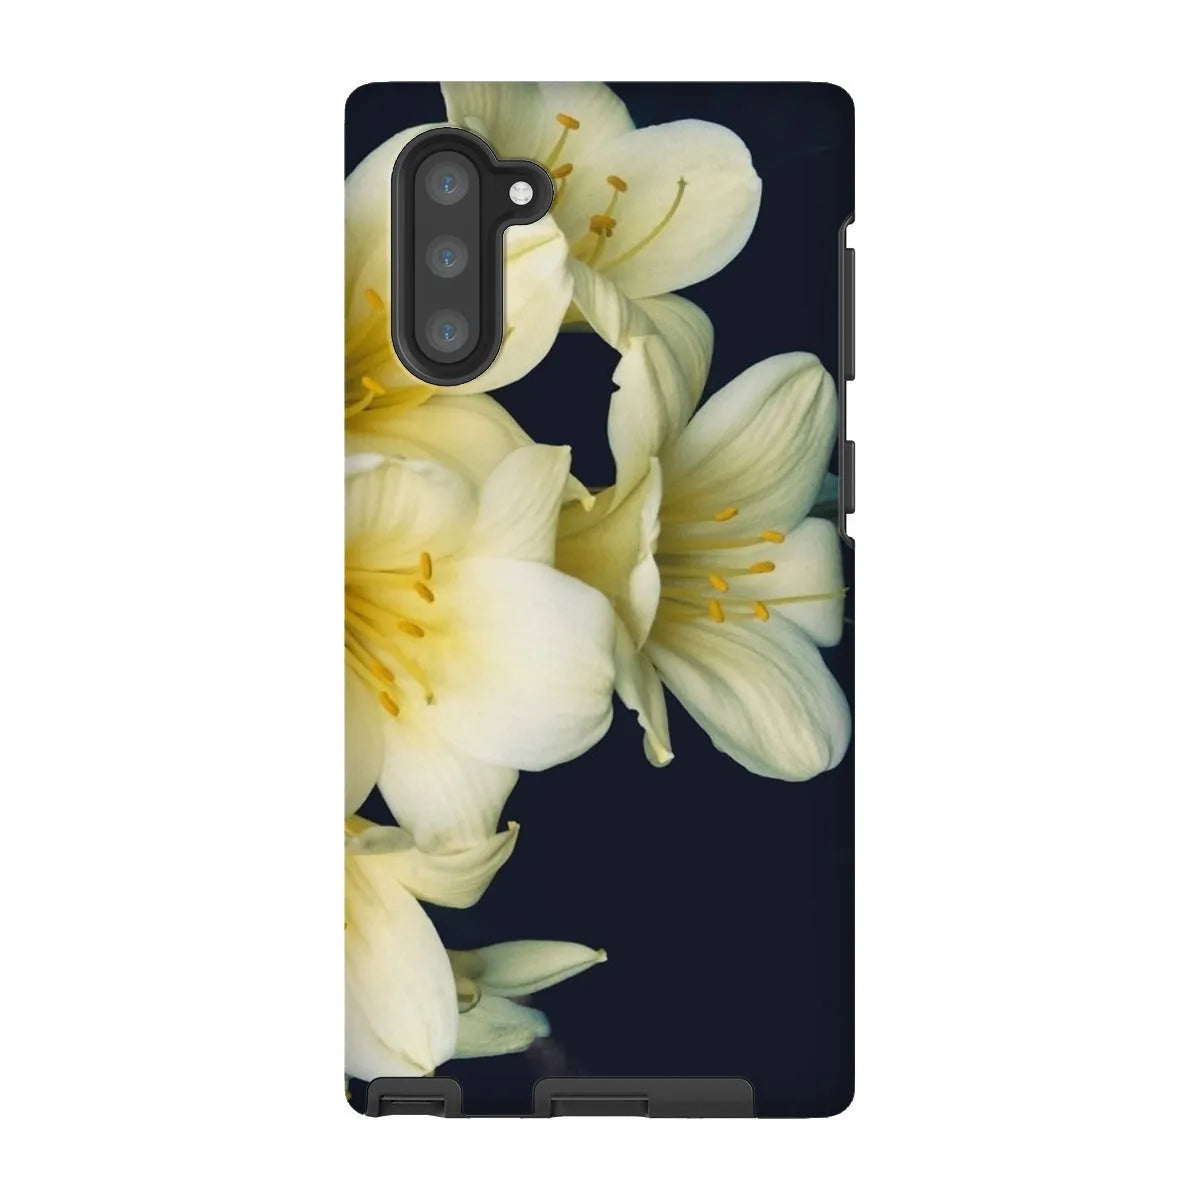 Flower Power Too Tough Phone Case - Samsung Galaxy Note 10 / Matte - Mobile Phone Cases - Aesthetic Art